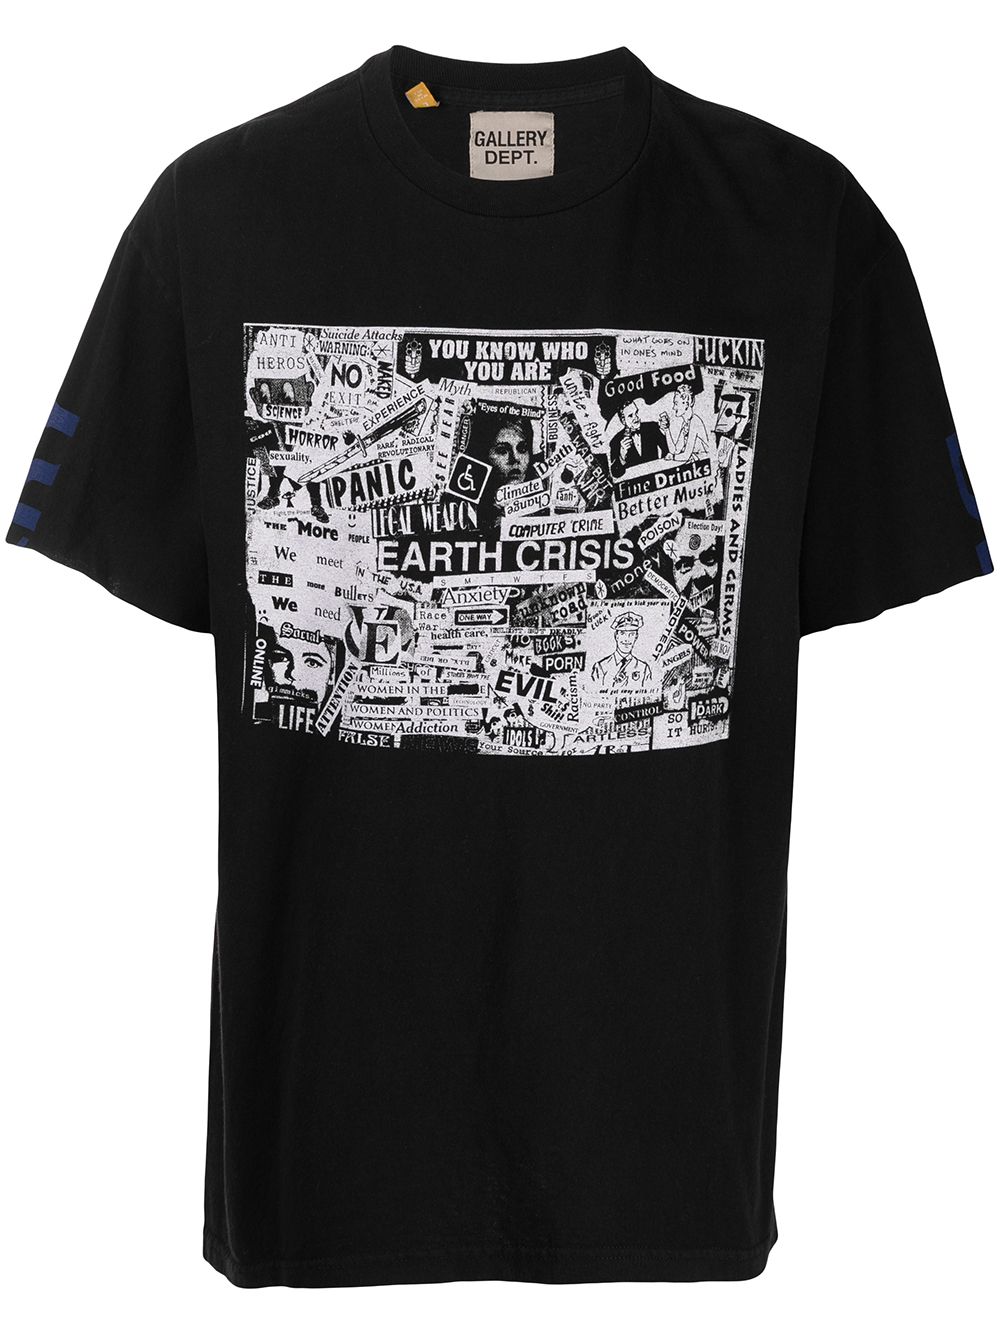 Gallery Dept. Graphic Print T-shirt In Black